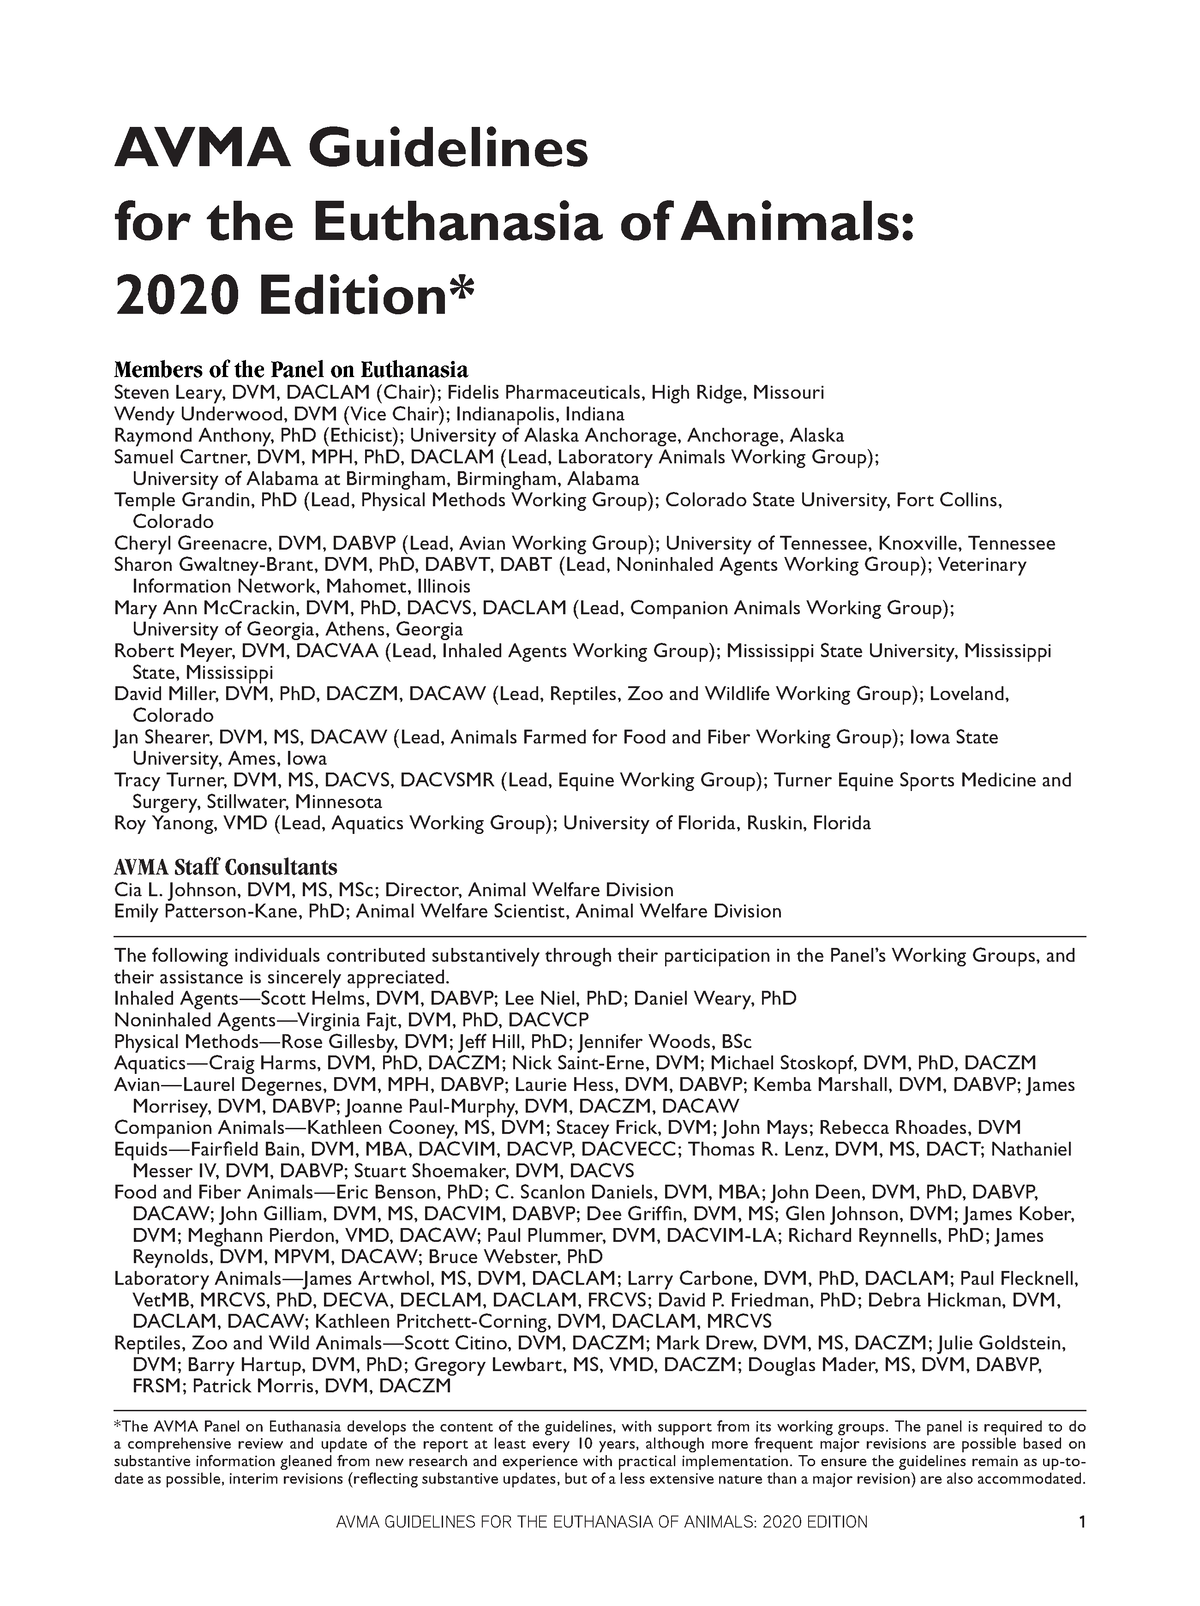 Guidelines on Euthanasia 2020 AVMA Guidelines for the Euthanasia of